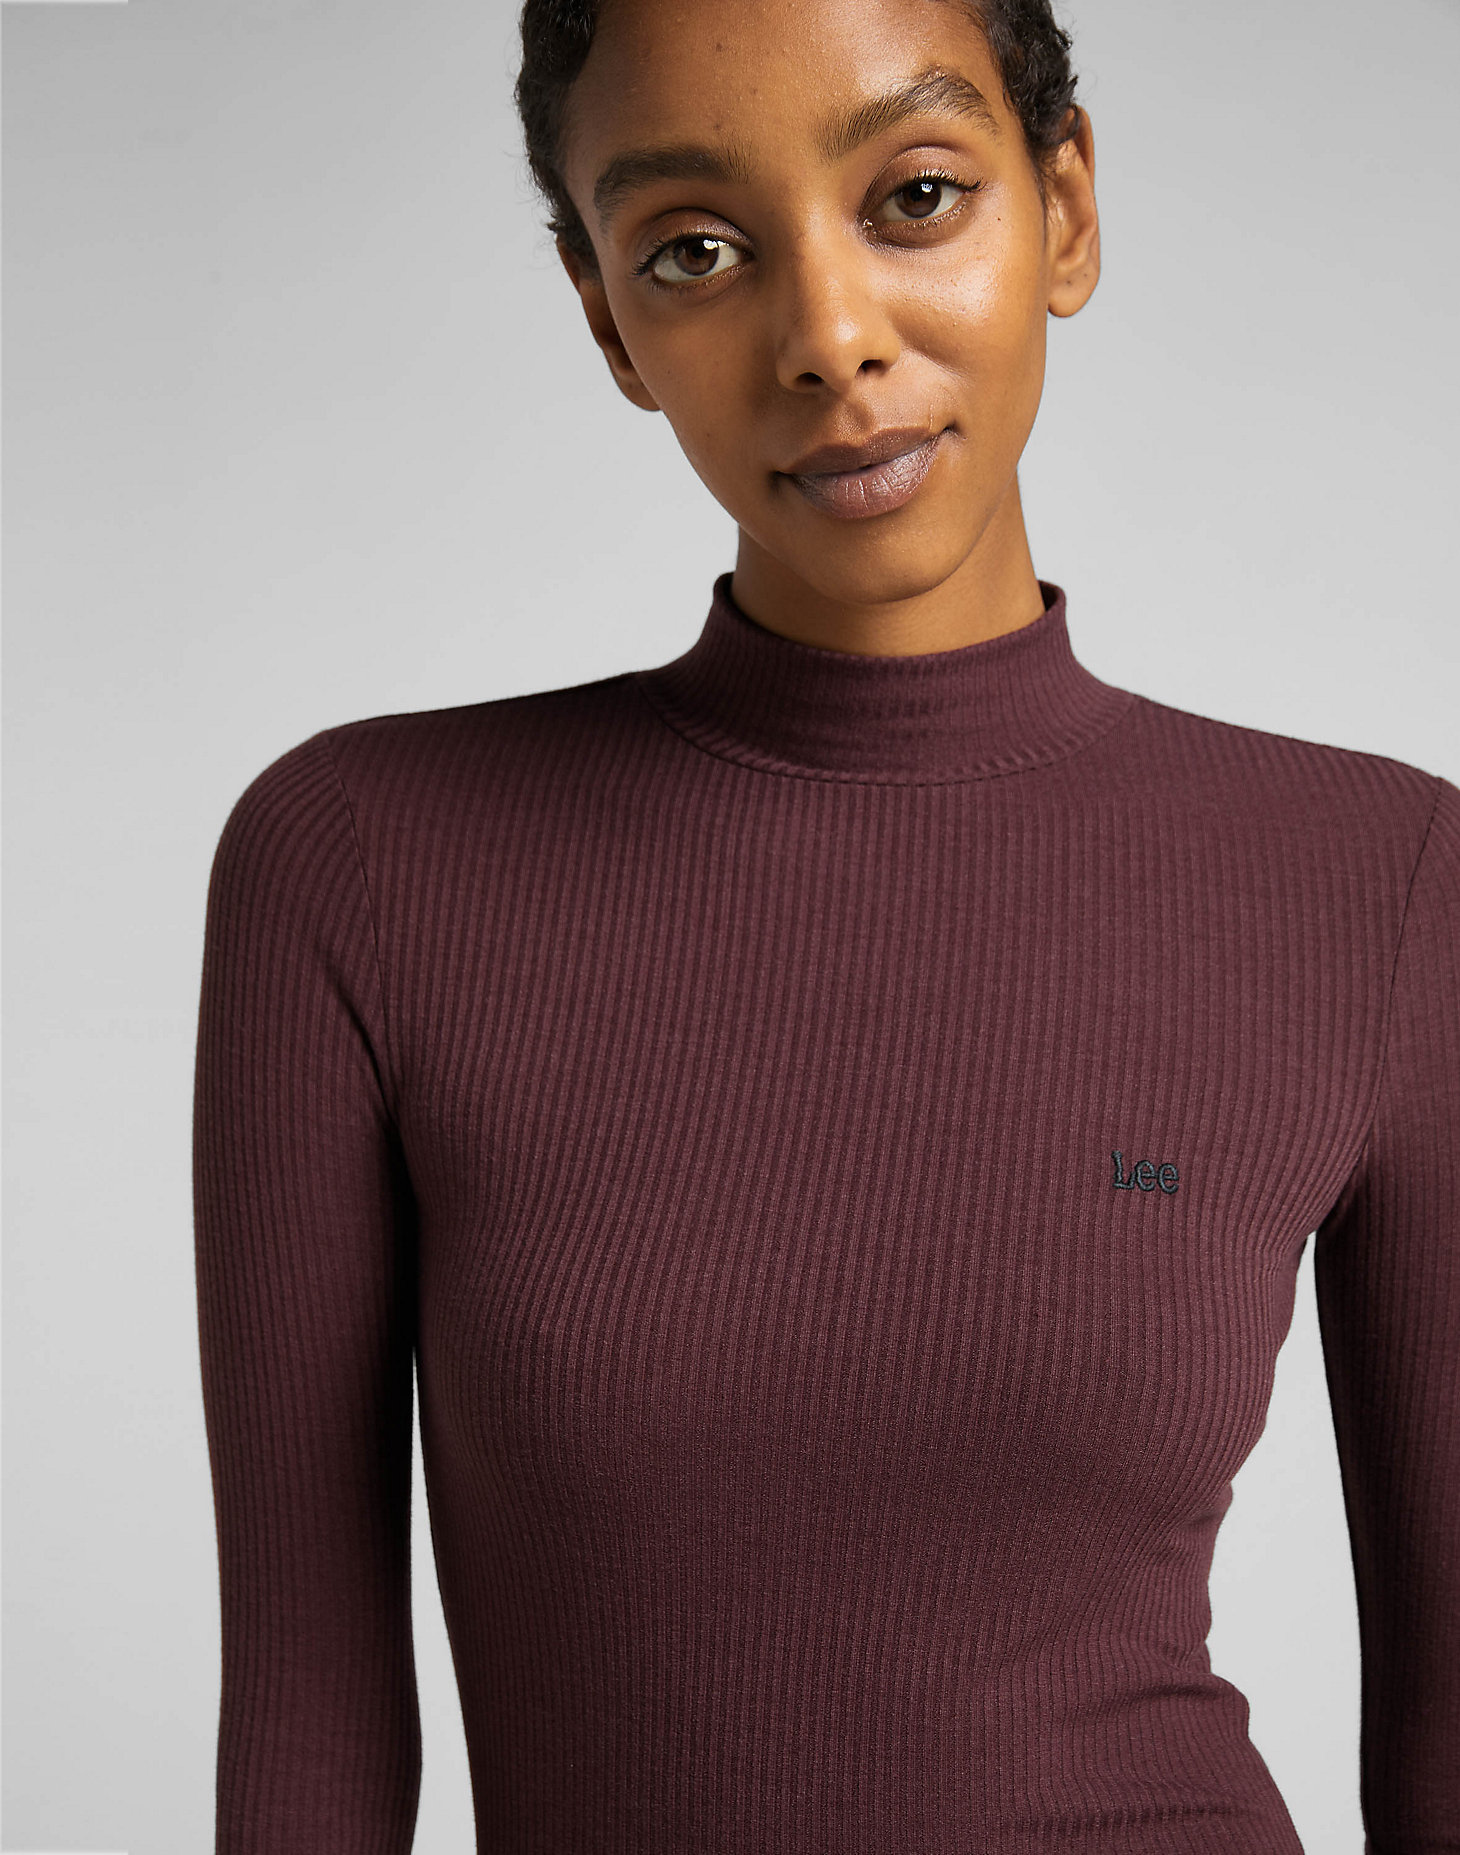 Ribbed Long Sleeve Striped Tee in Boysenberry alternative view 4